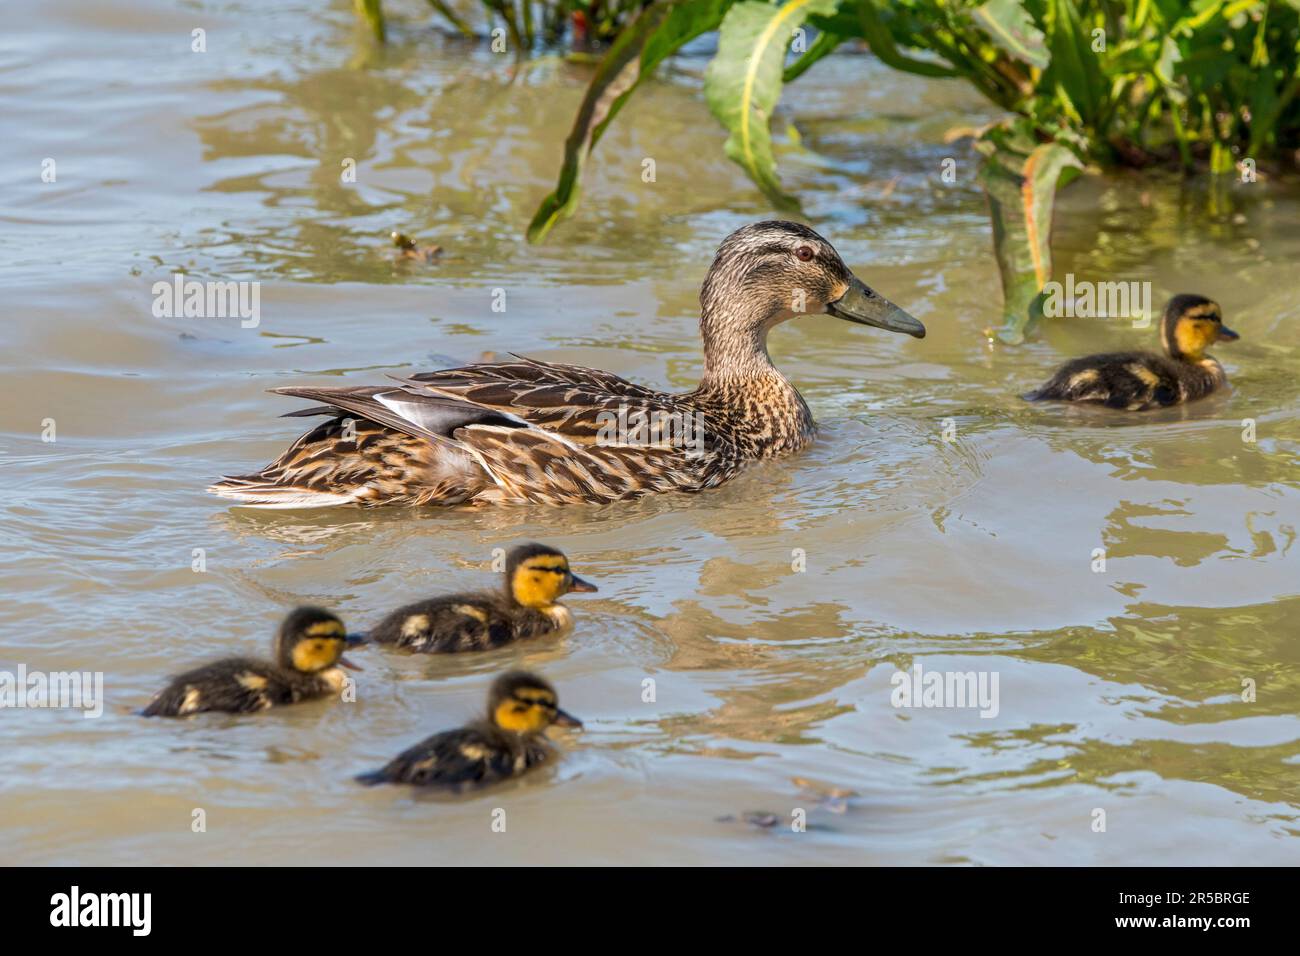 Garganey (Spatula querquedula) female swimming with chicks / ducklings in pond in spring Stock Photo